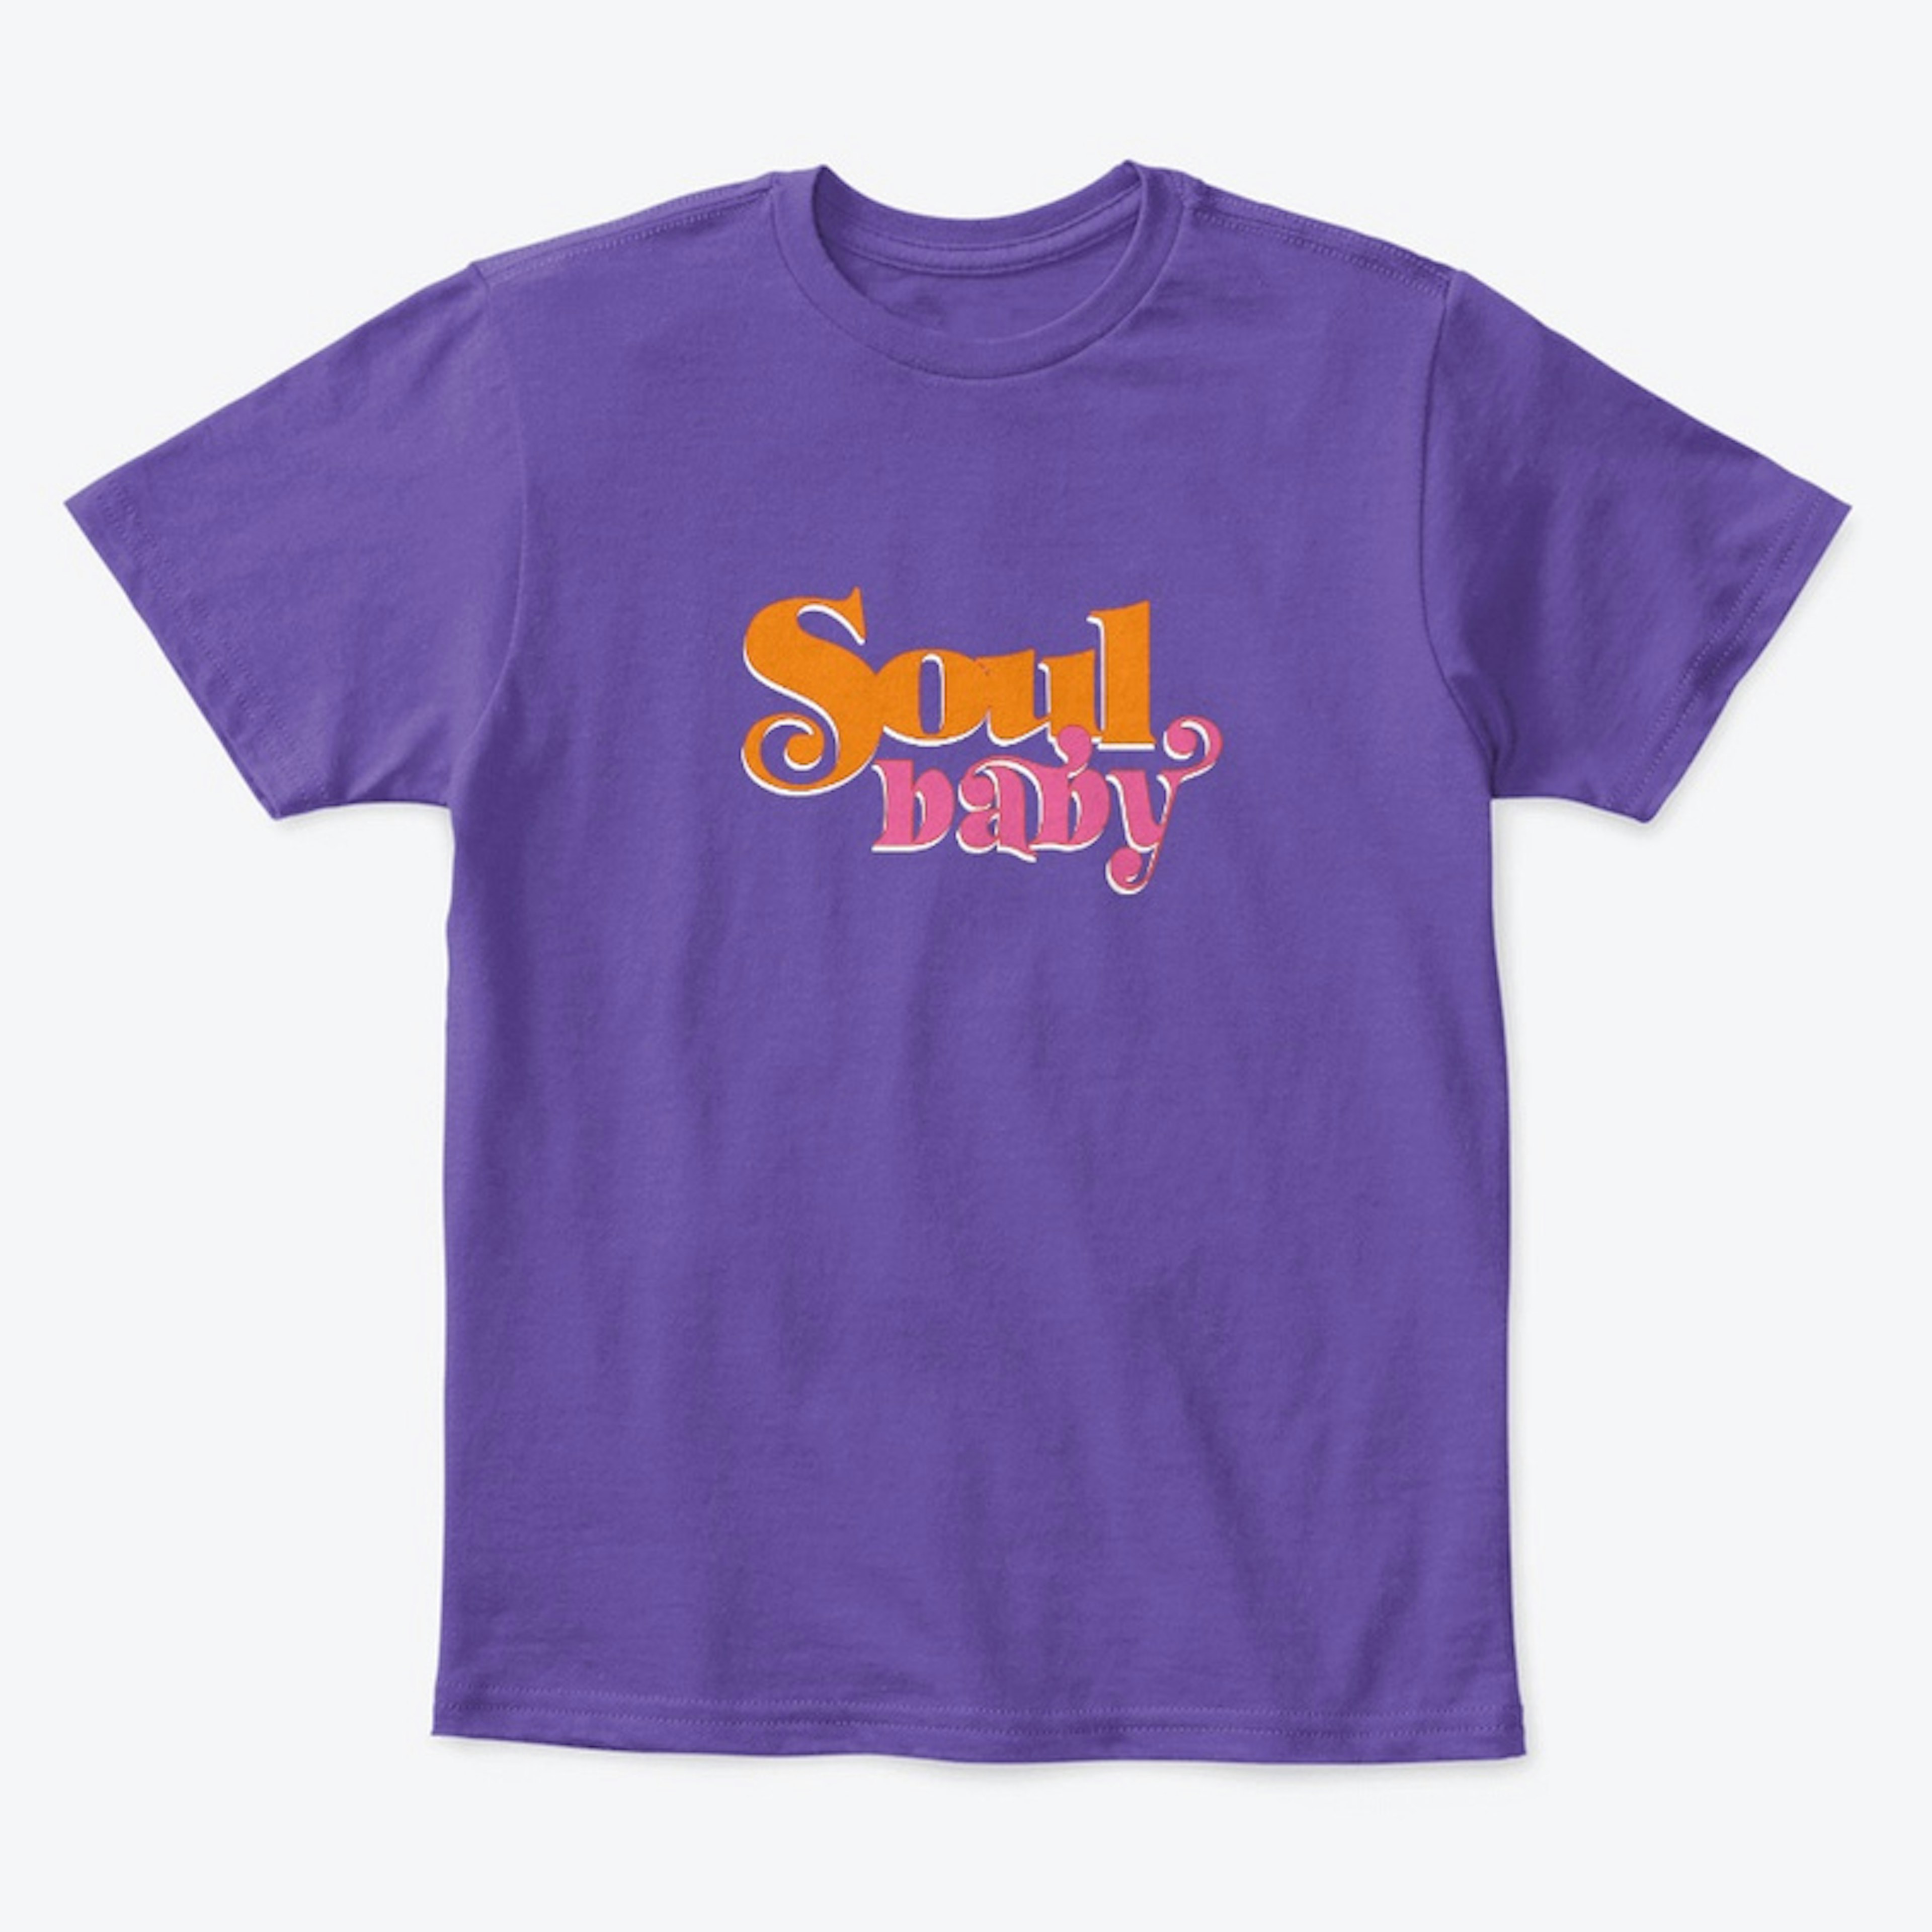 SPECIAL EDITION Soul Baby Kids Tee